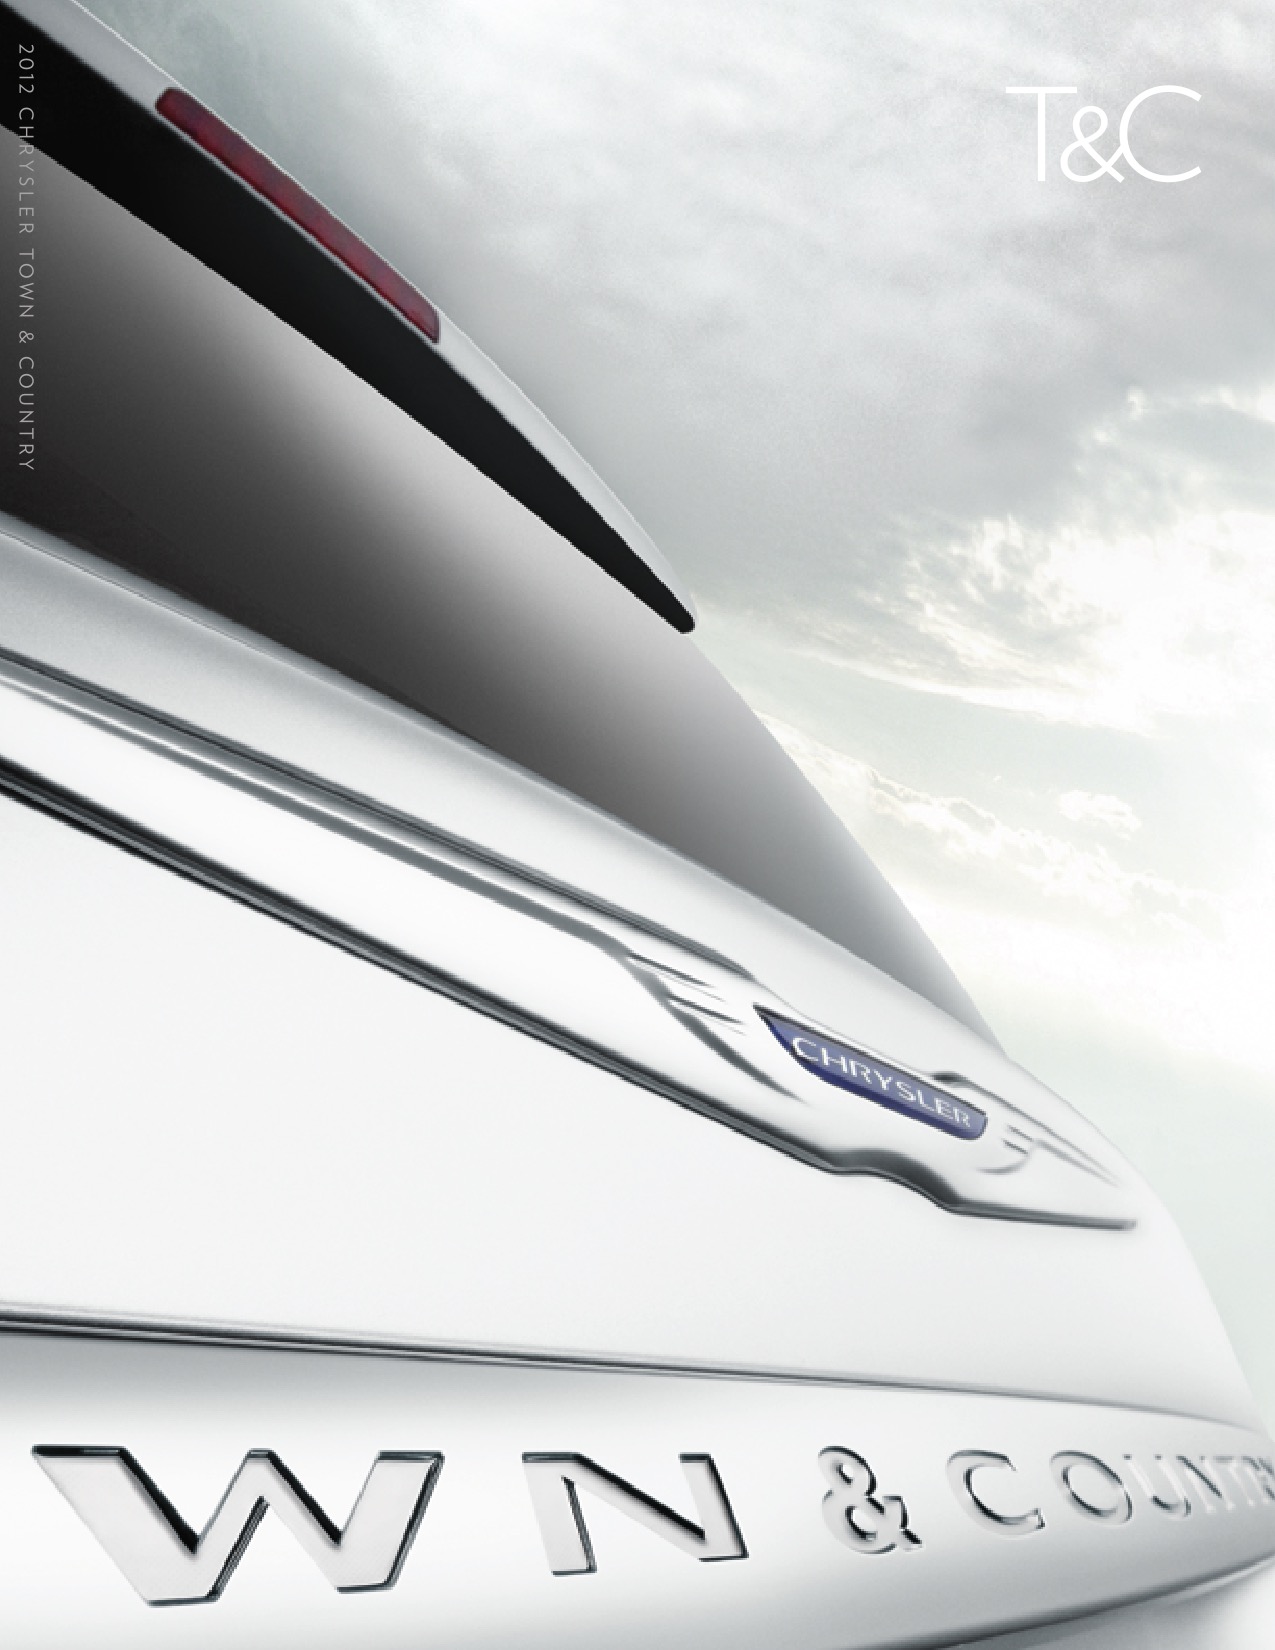 2012 Chrysler Town & Country Brochure